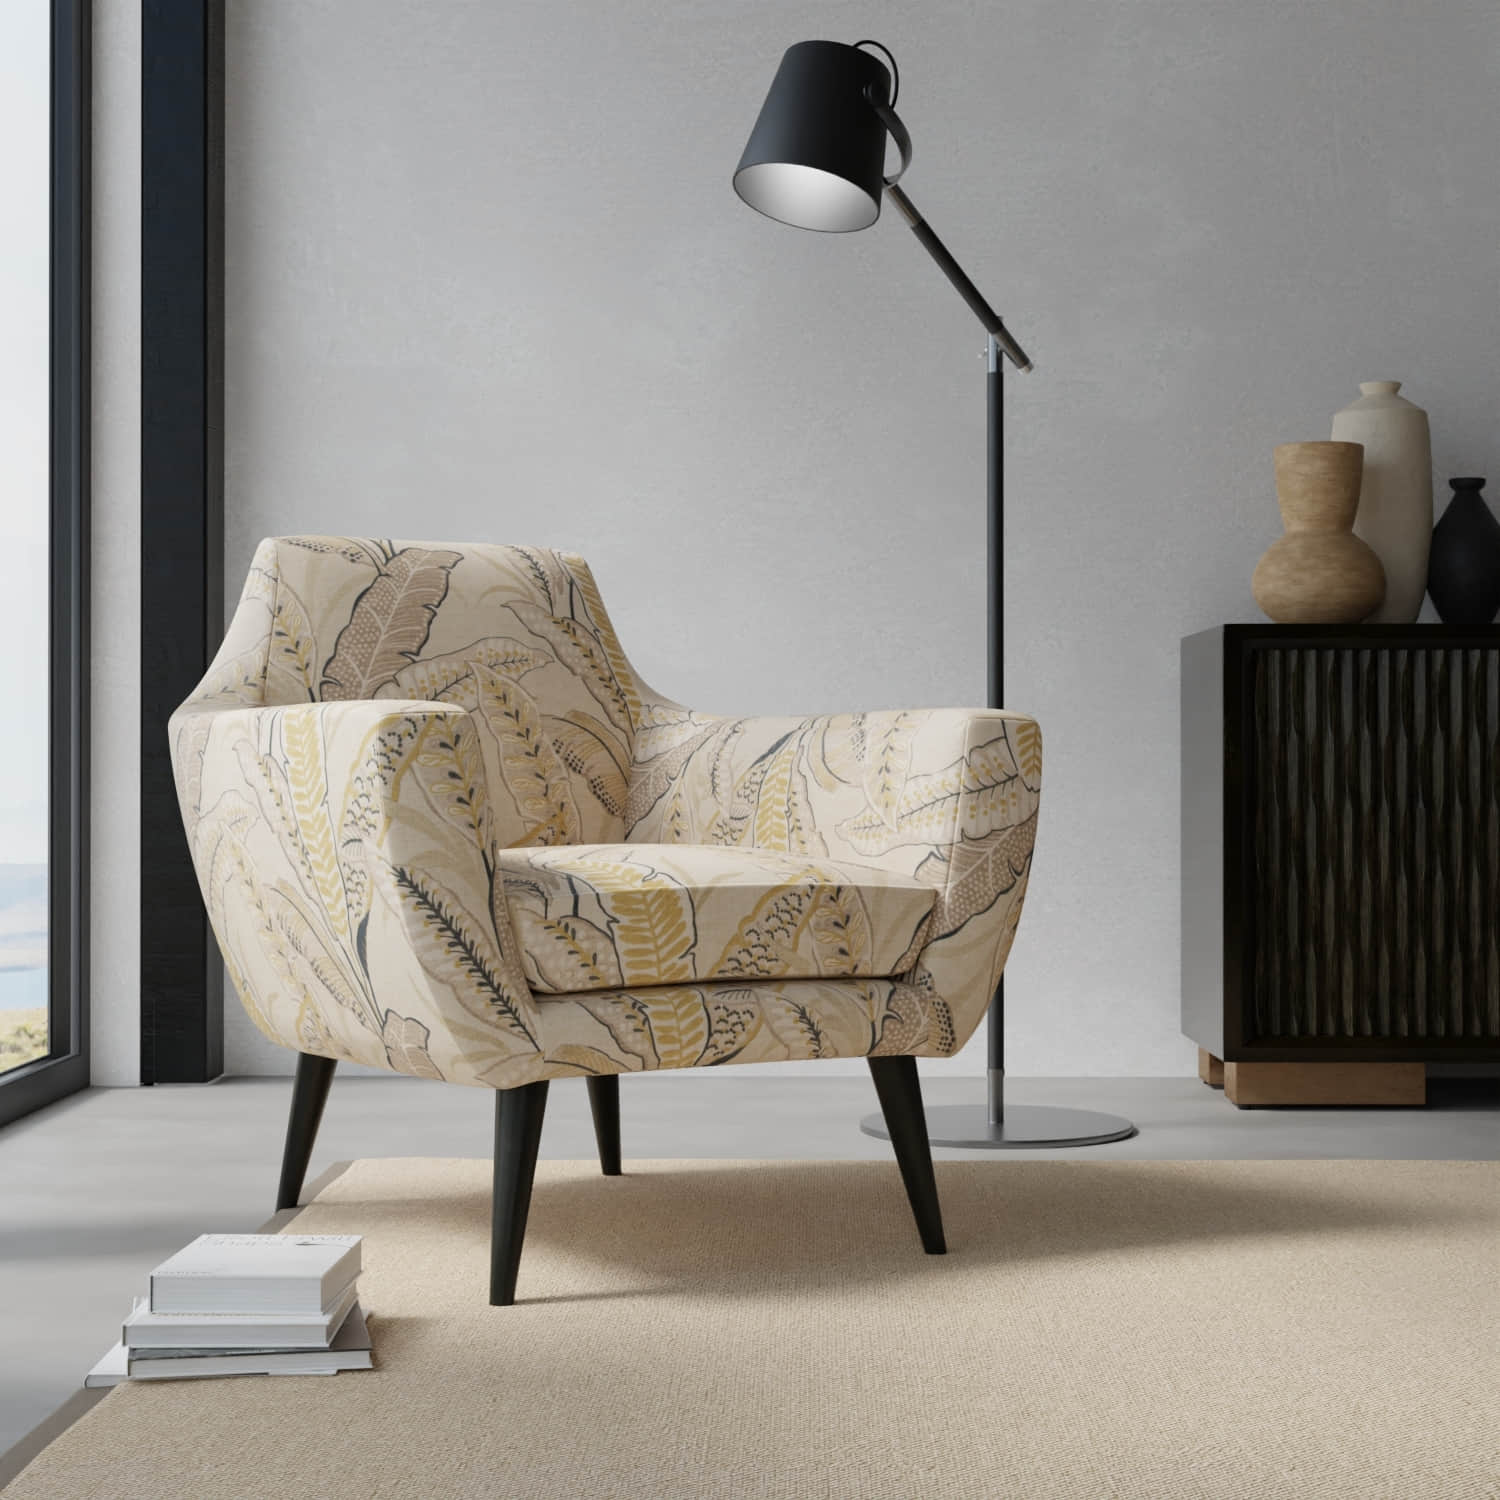 Berkley Wheat upholstered on a contemporary chair